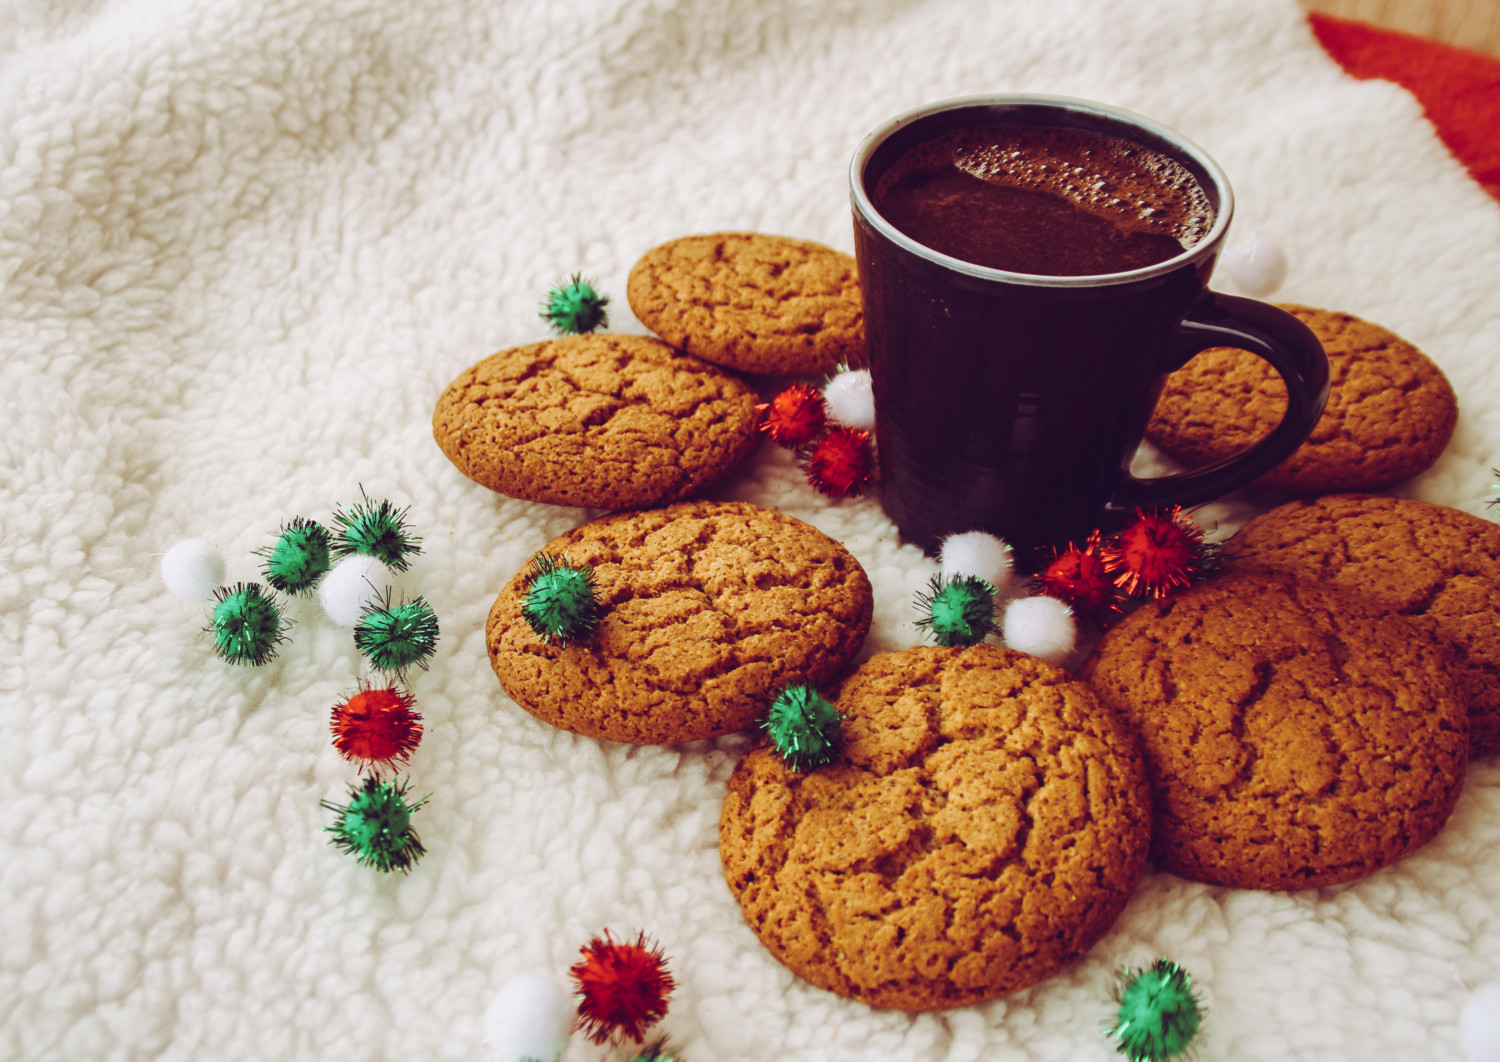 Ginger molasses cookies with hot chocolate